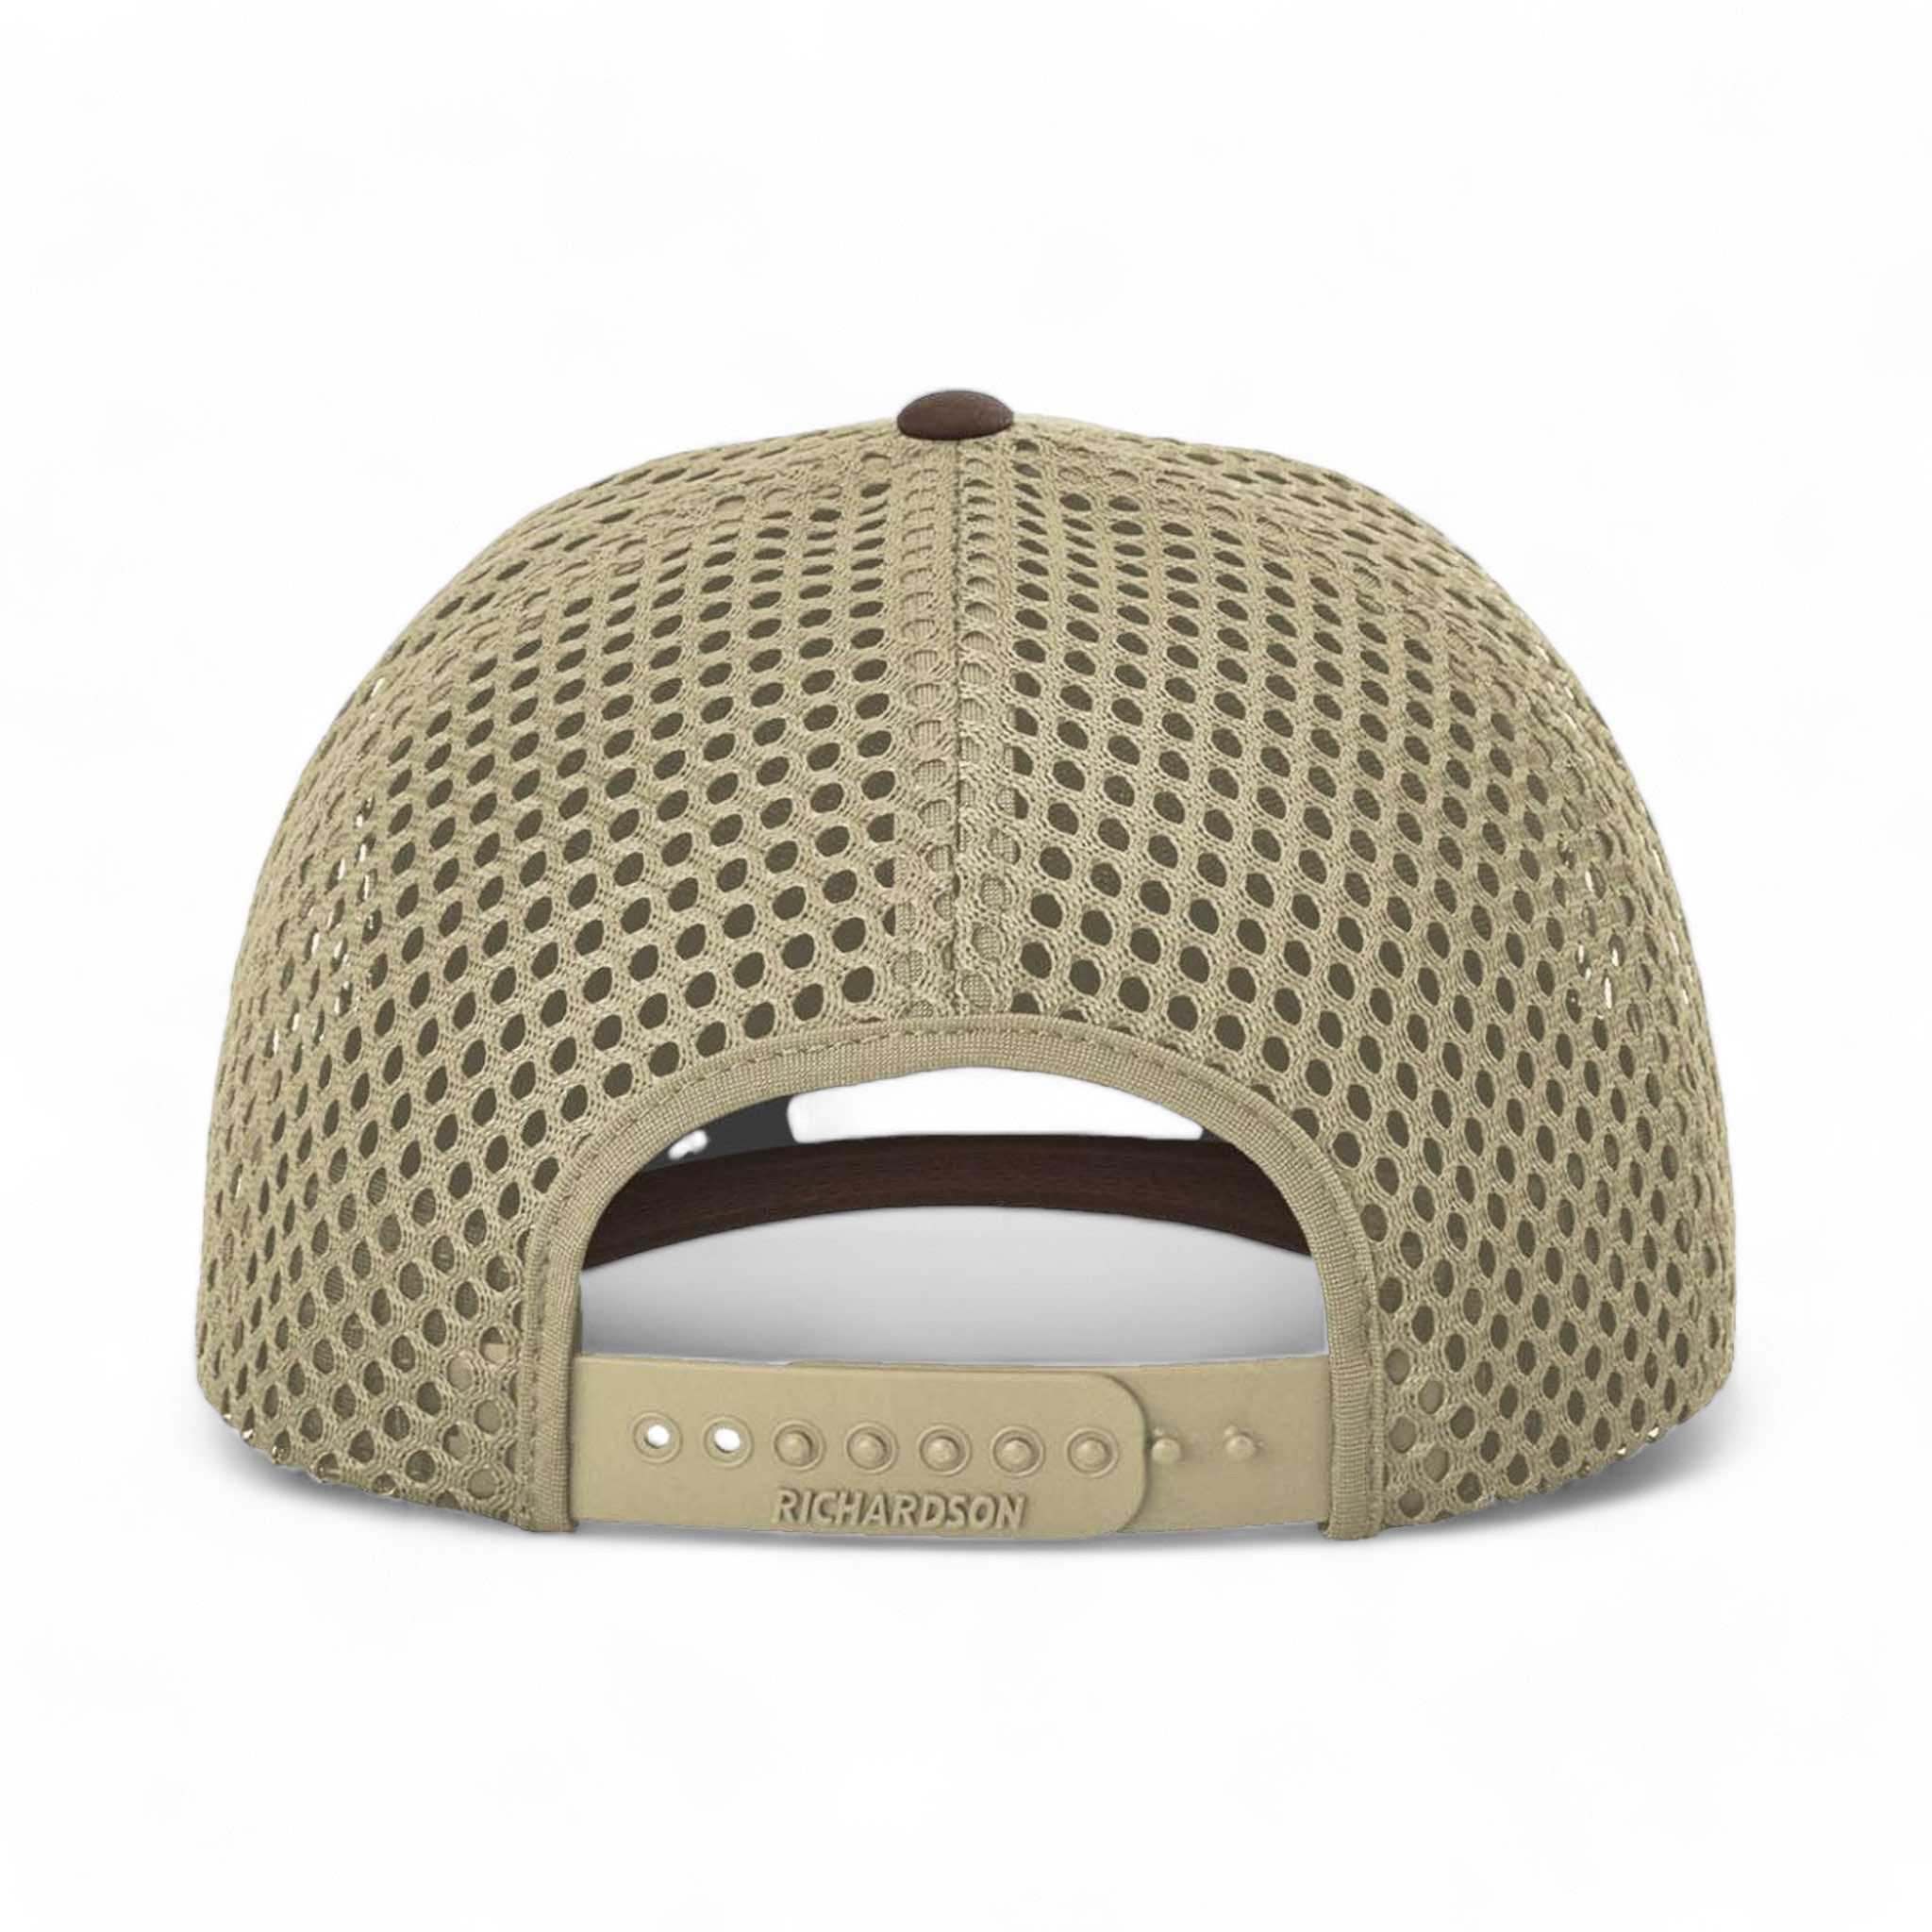 Back view of Richardson 835 custom hat in brown and khaki